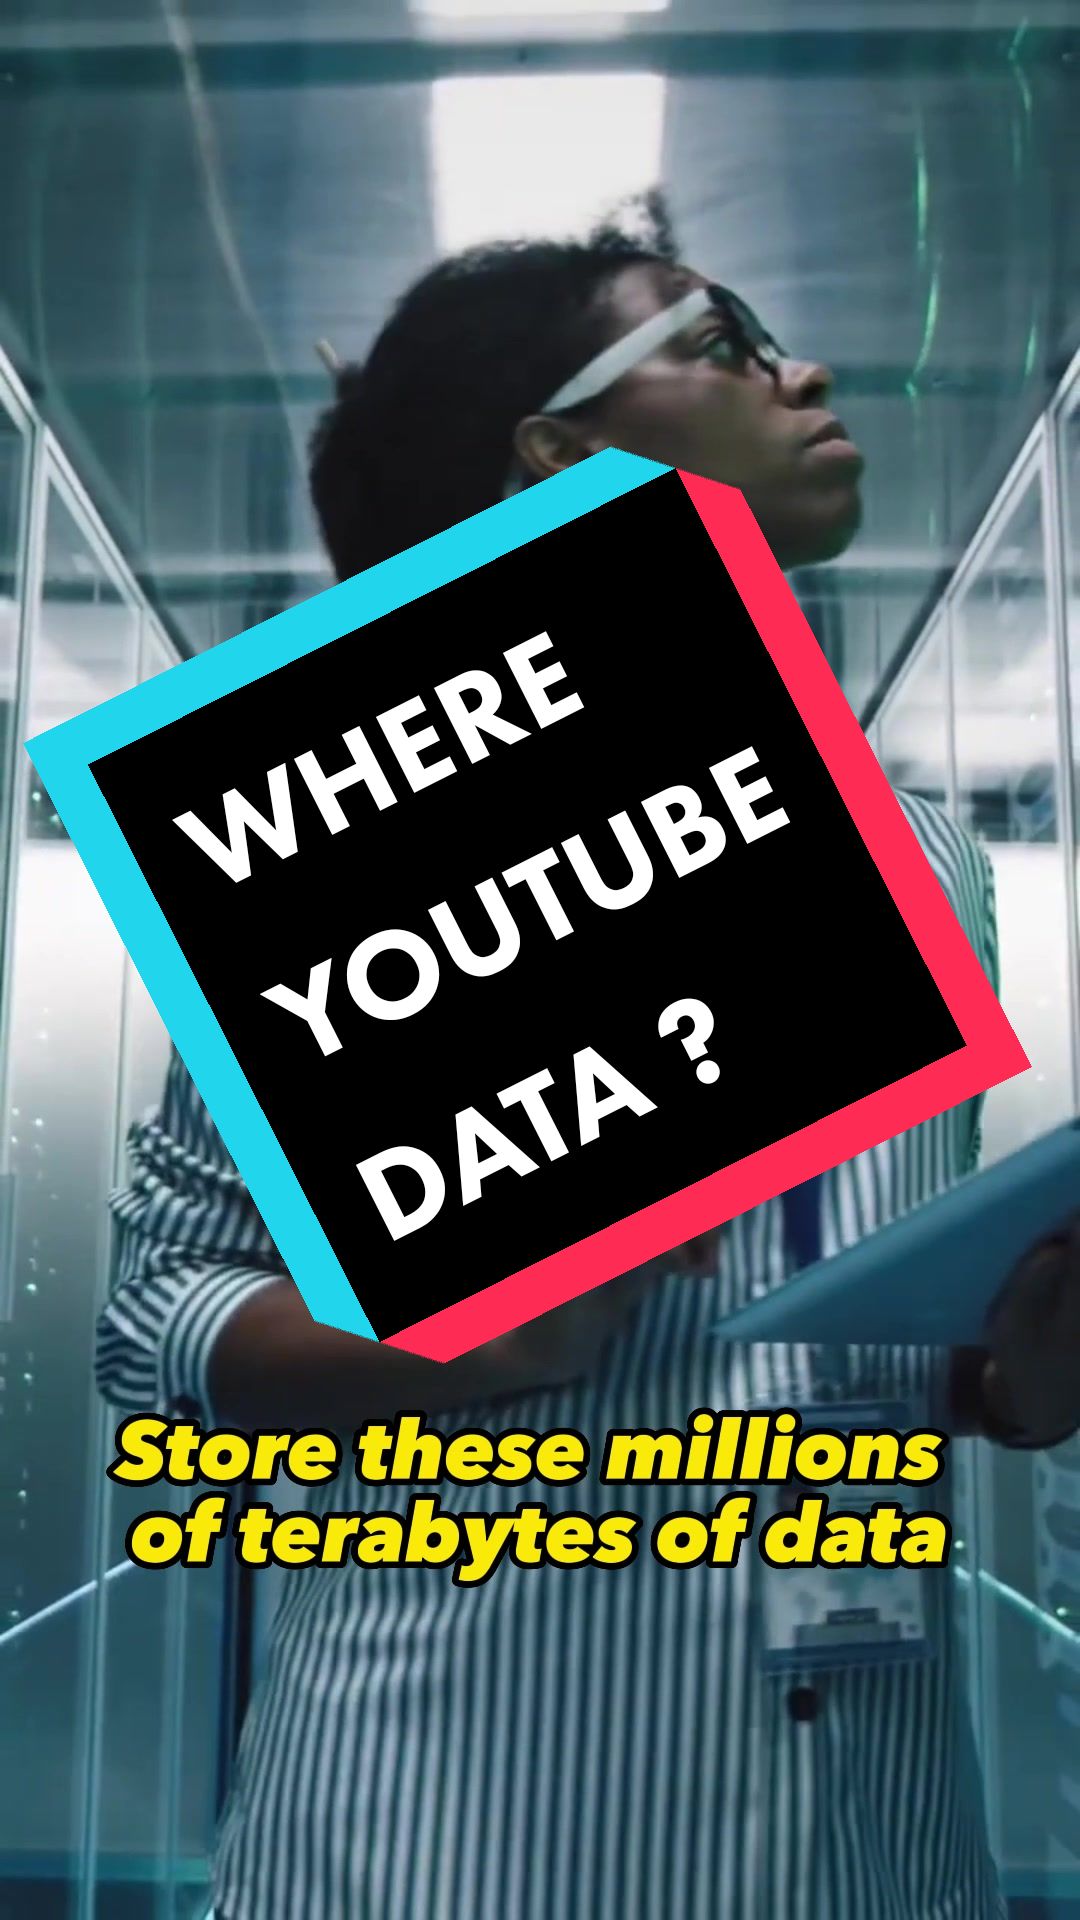 image how youtube store so much data